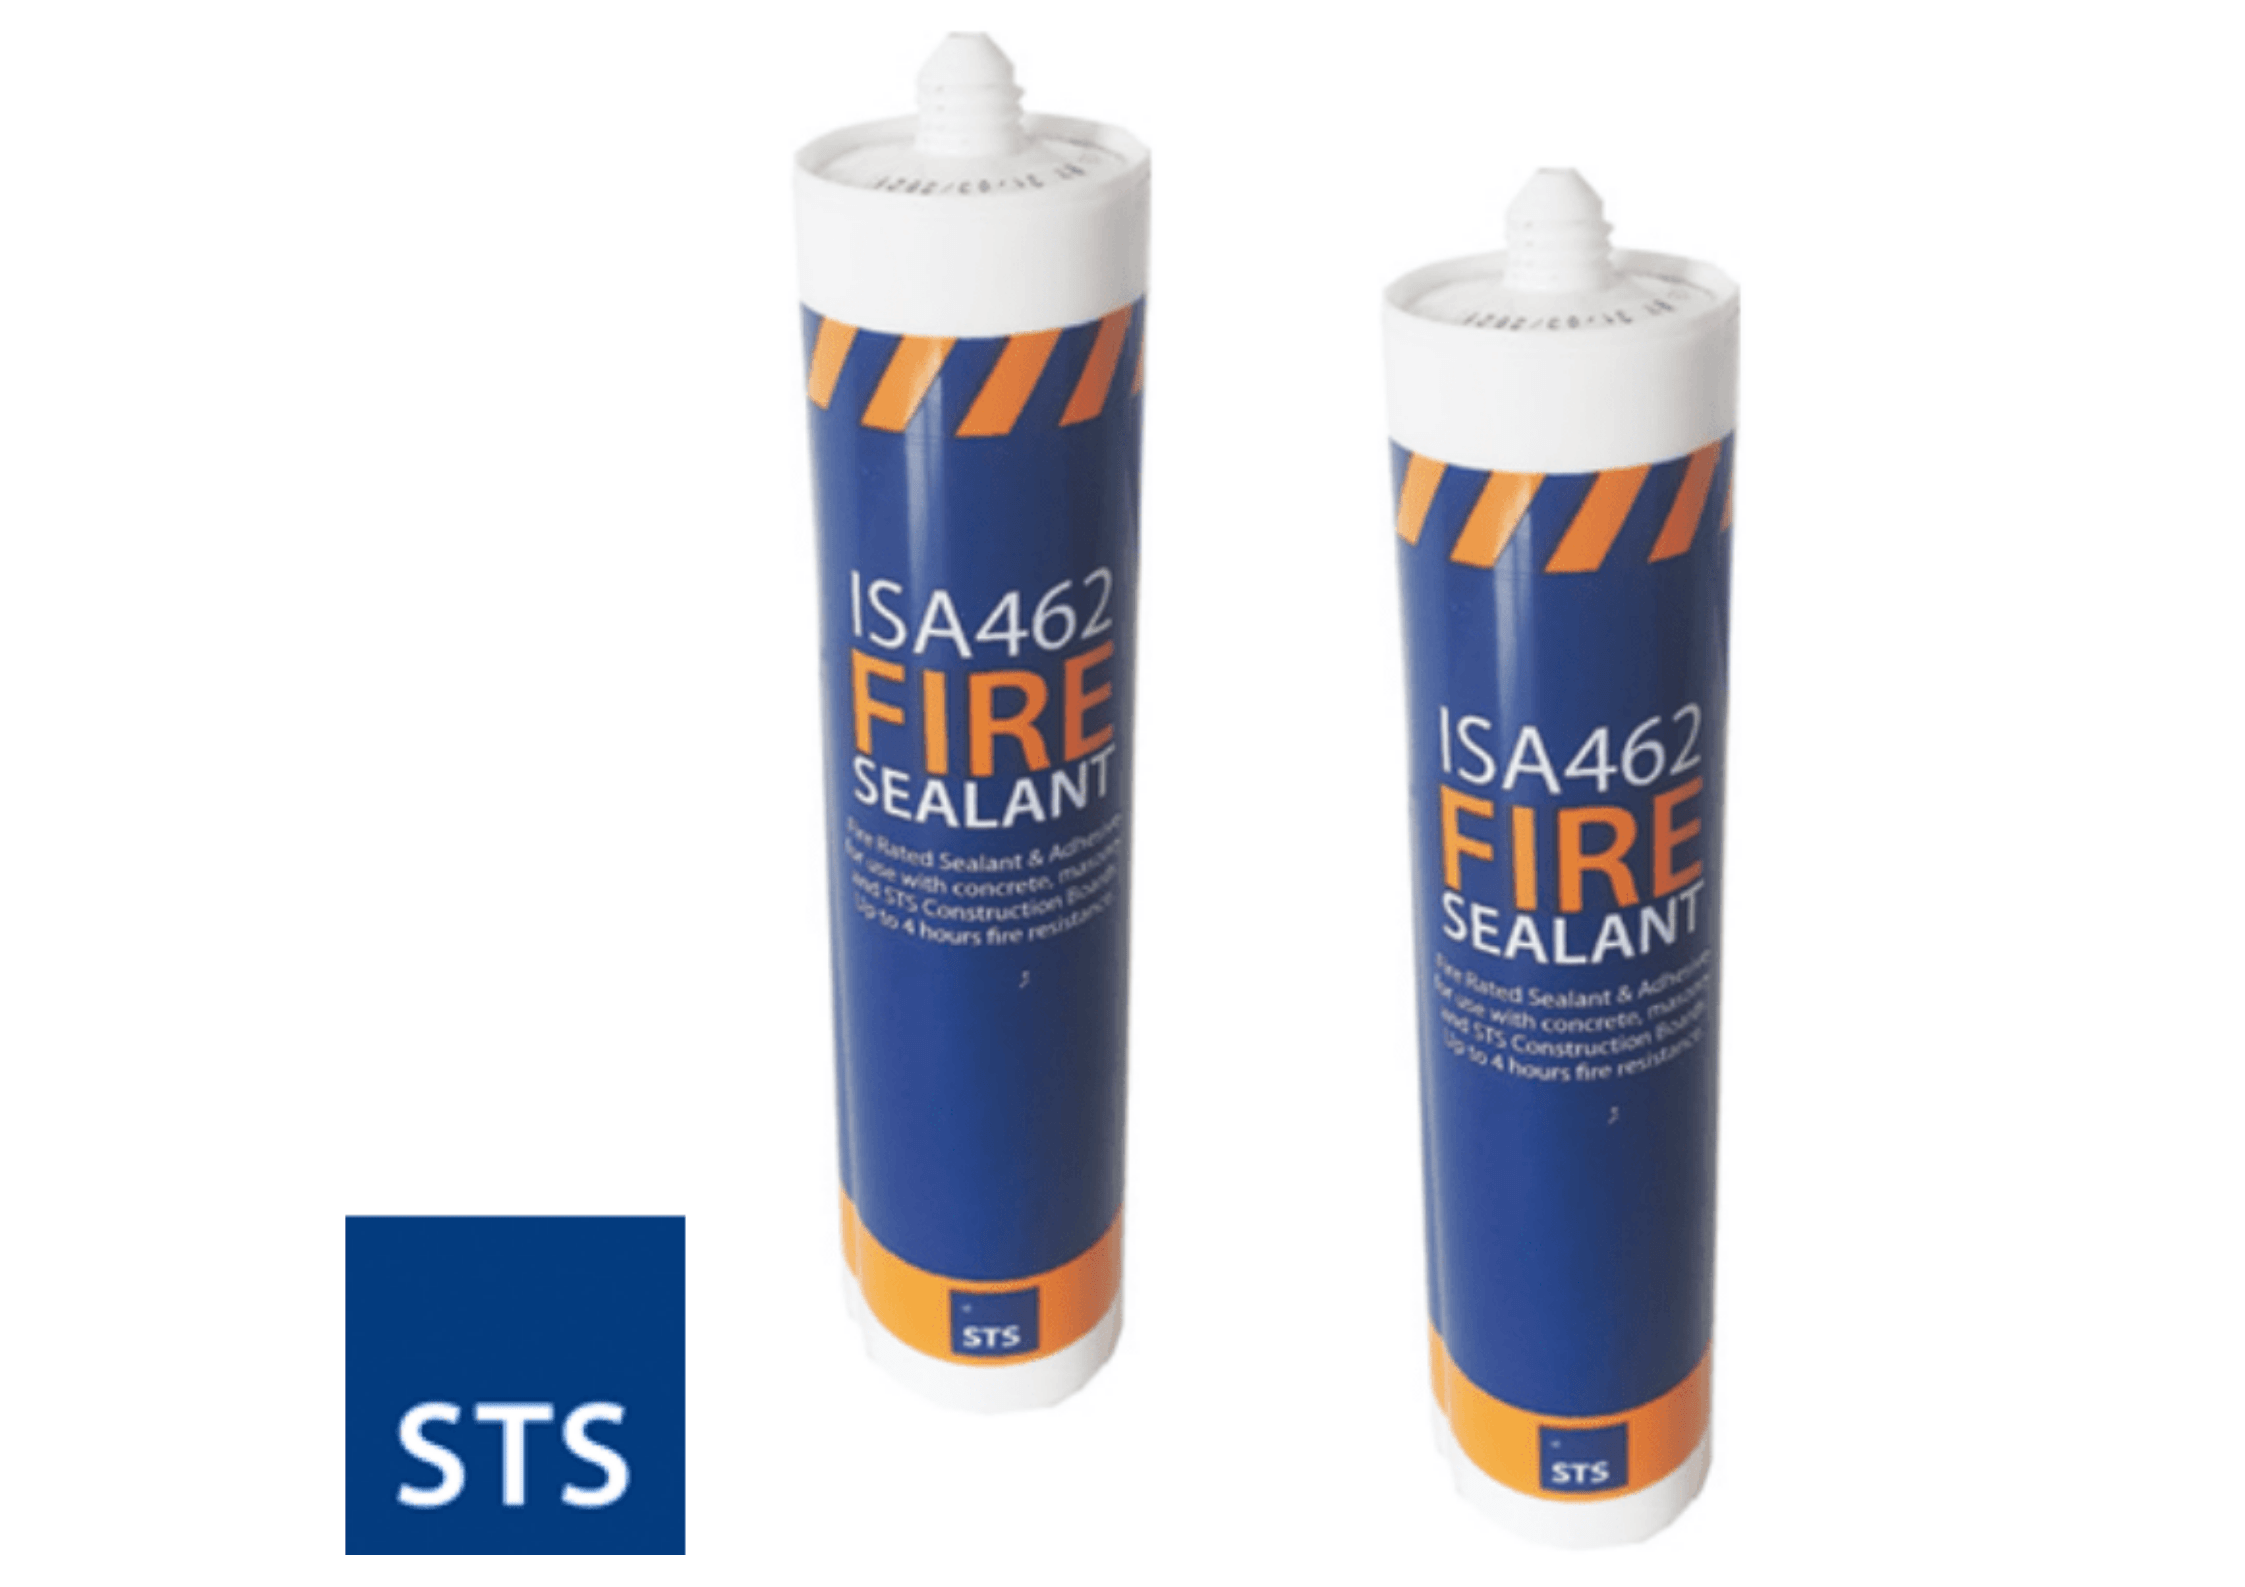 STS STS ISA462 Fire & Acoustic Sealant 310ml IUK00995 STS ISA462 Fire & Acoustic Sealant 310ml | insulationuk.co.uk